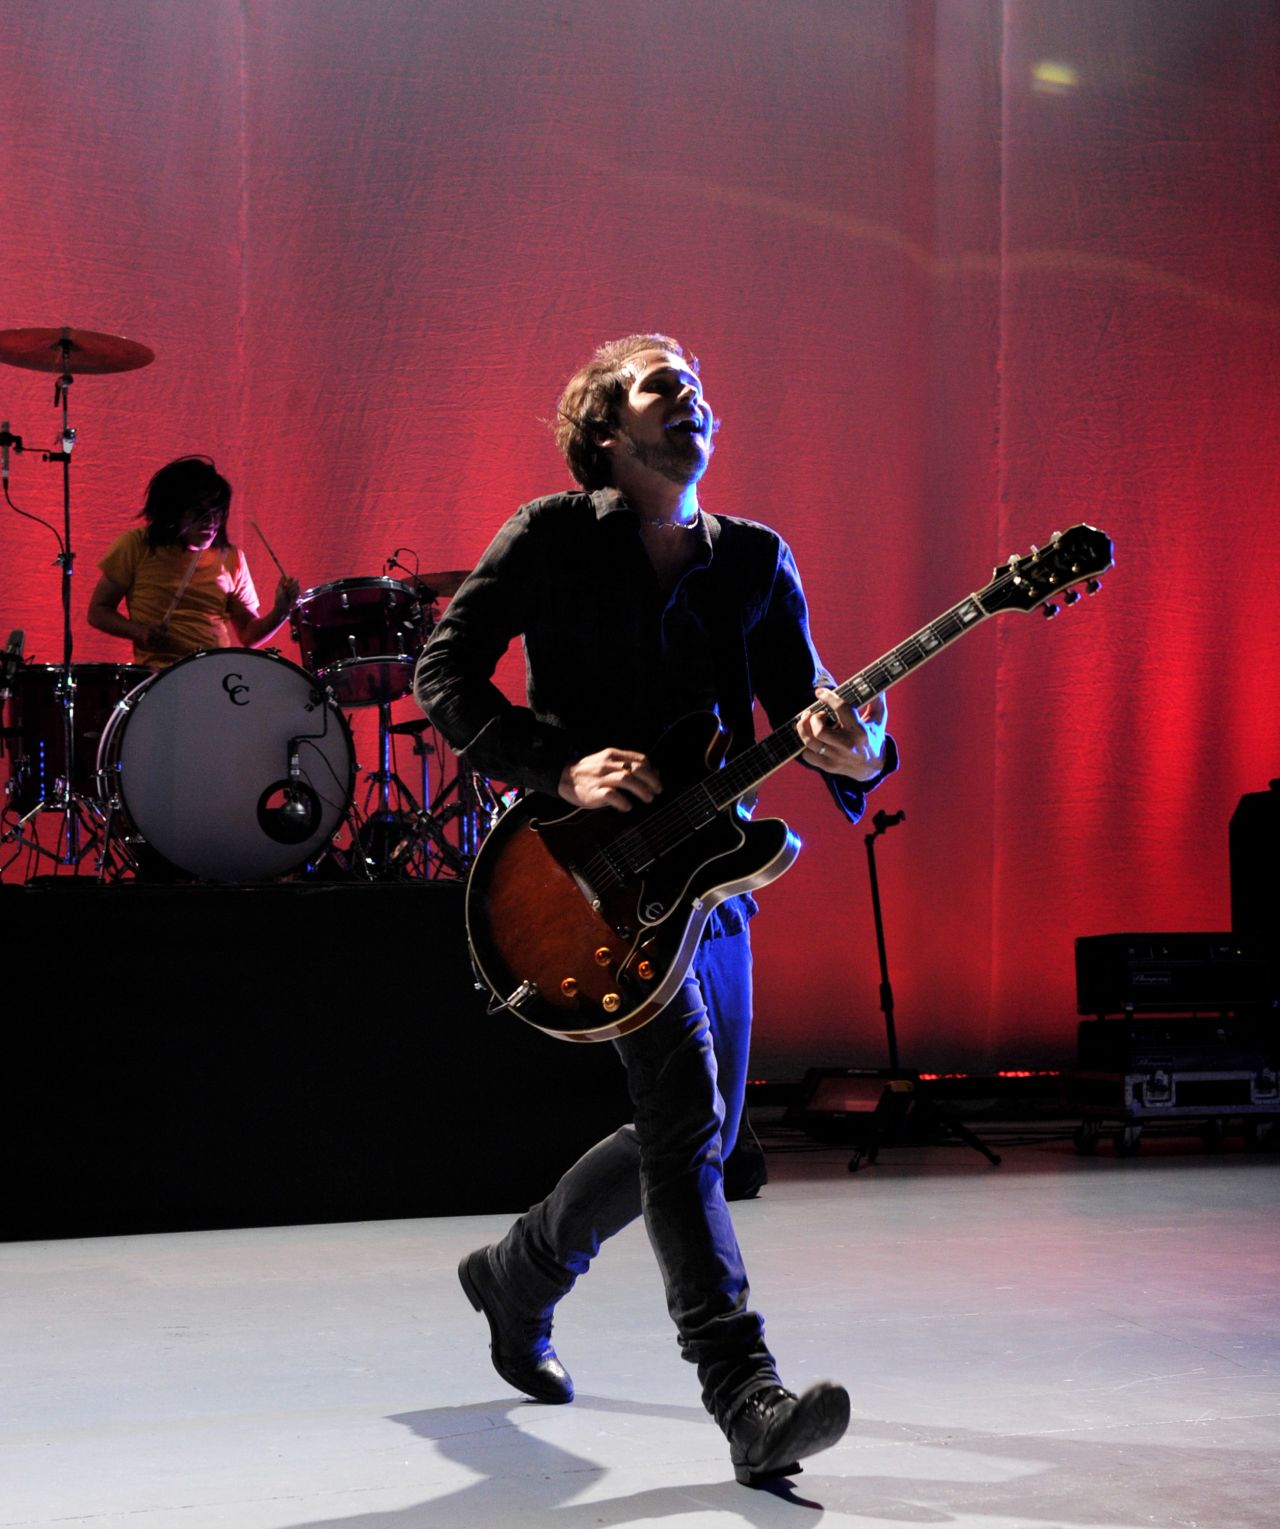 The Silversun Pickups served Mitt Romney's campaign with a <a href="http://edition.cnn.com/2012/08/16/politics/music-in-campaigns/">cease-and-desist order</a> in 2012 after they said the campaign used their song "Panic Switch" at an event. 